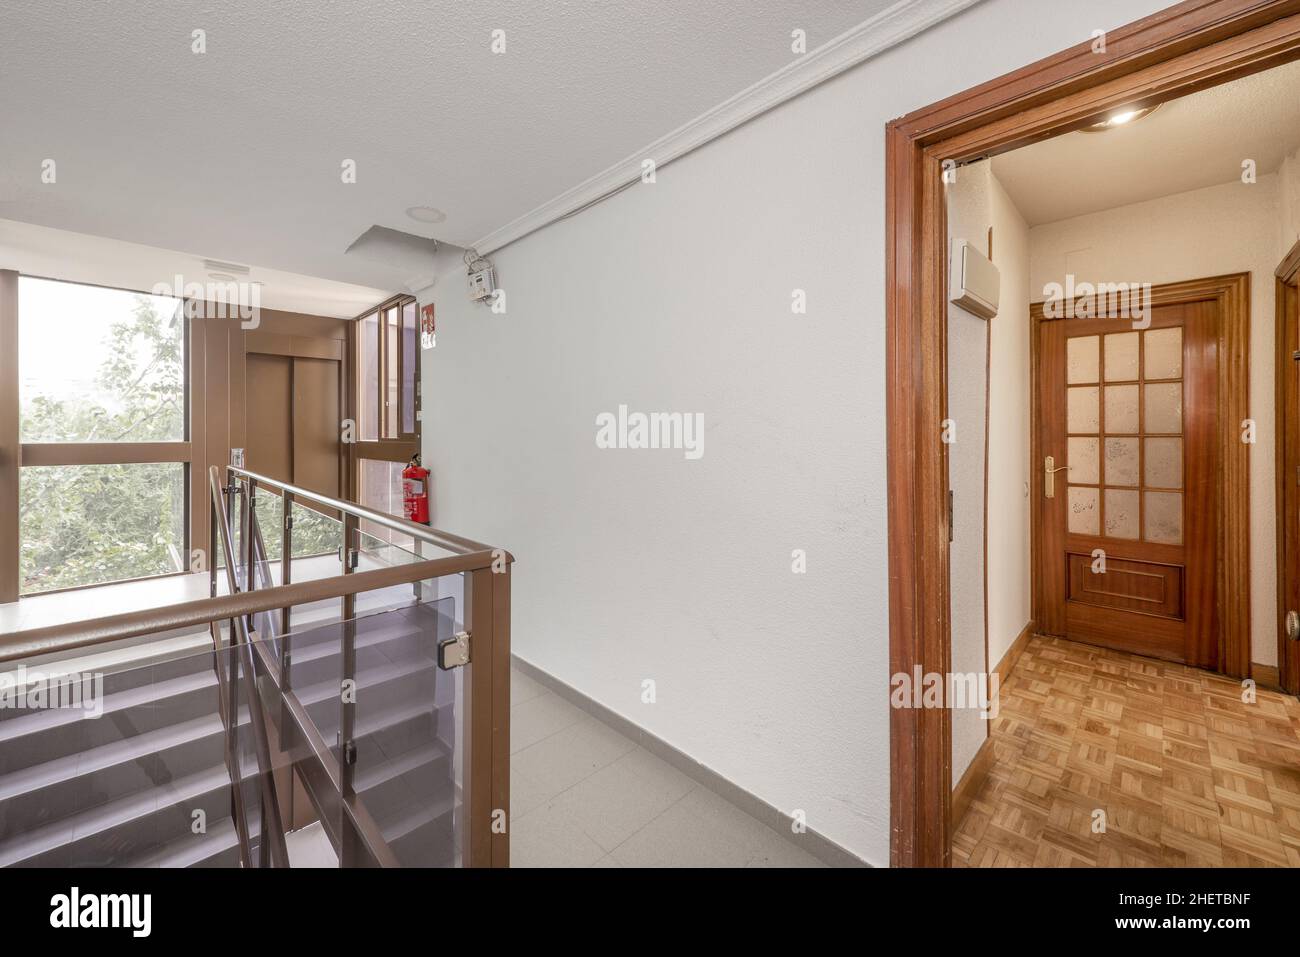 Entrance to a residential house with dark wood carpentry, stairs with aluminum and glass balustrade Stock Photo